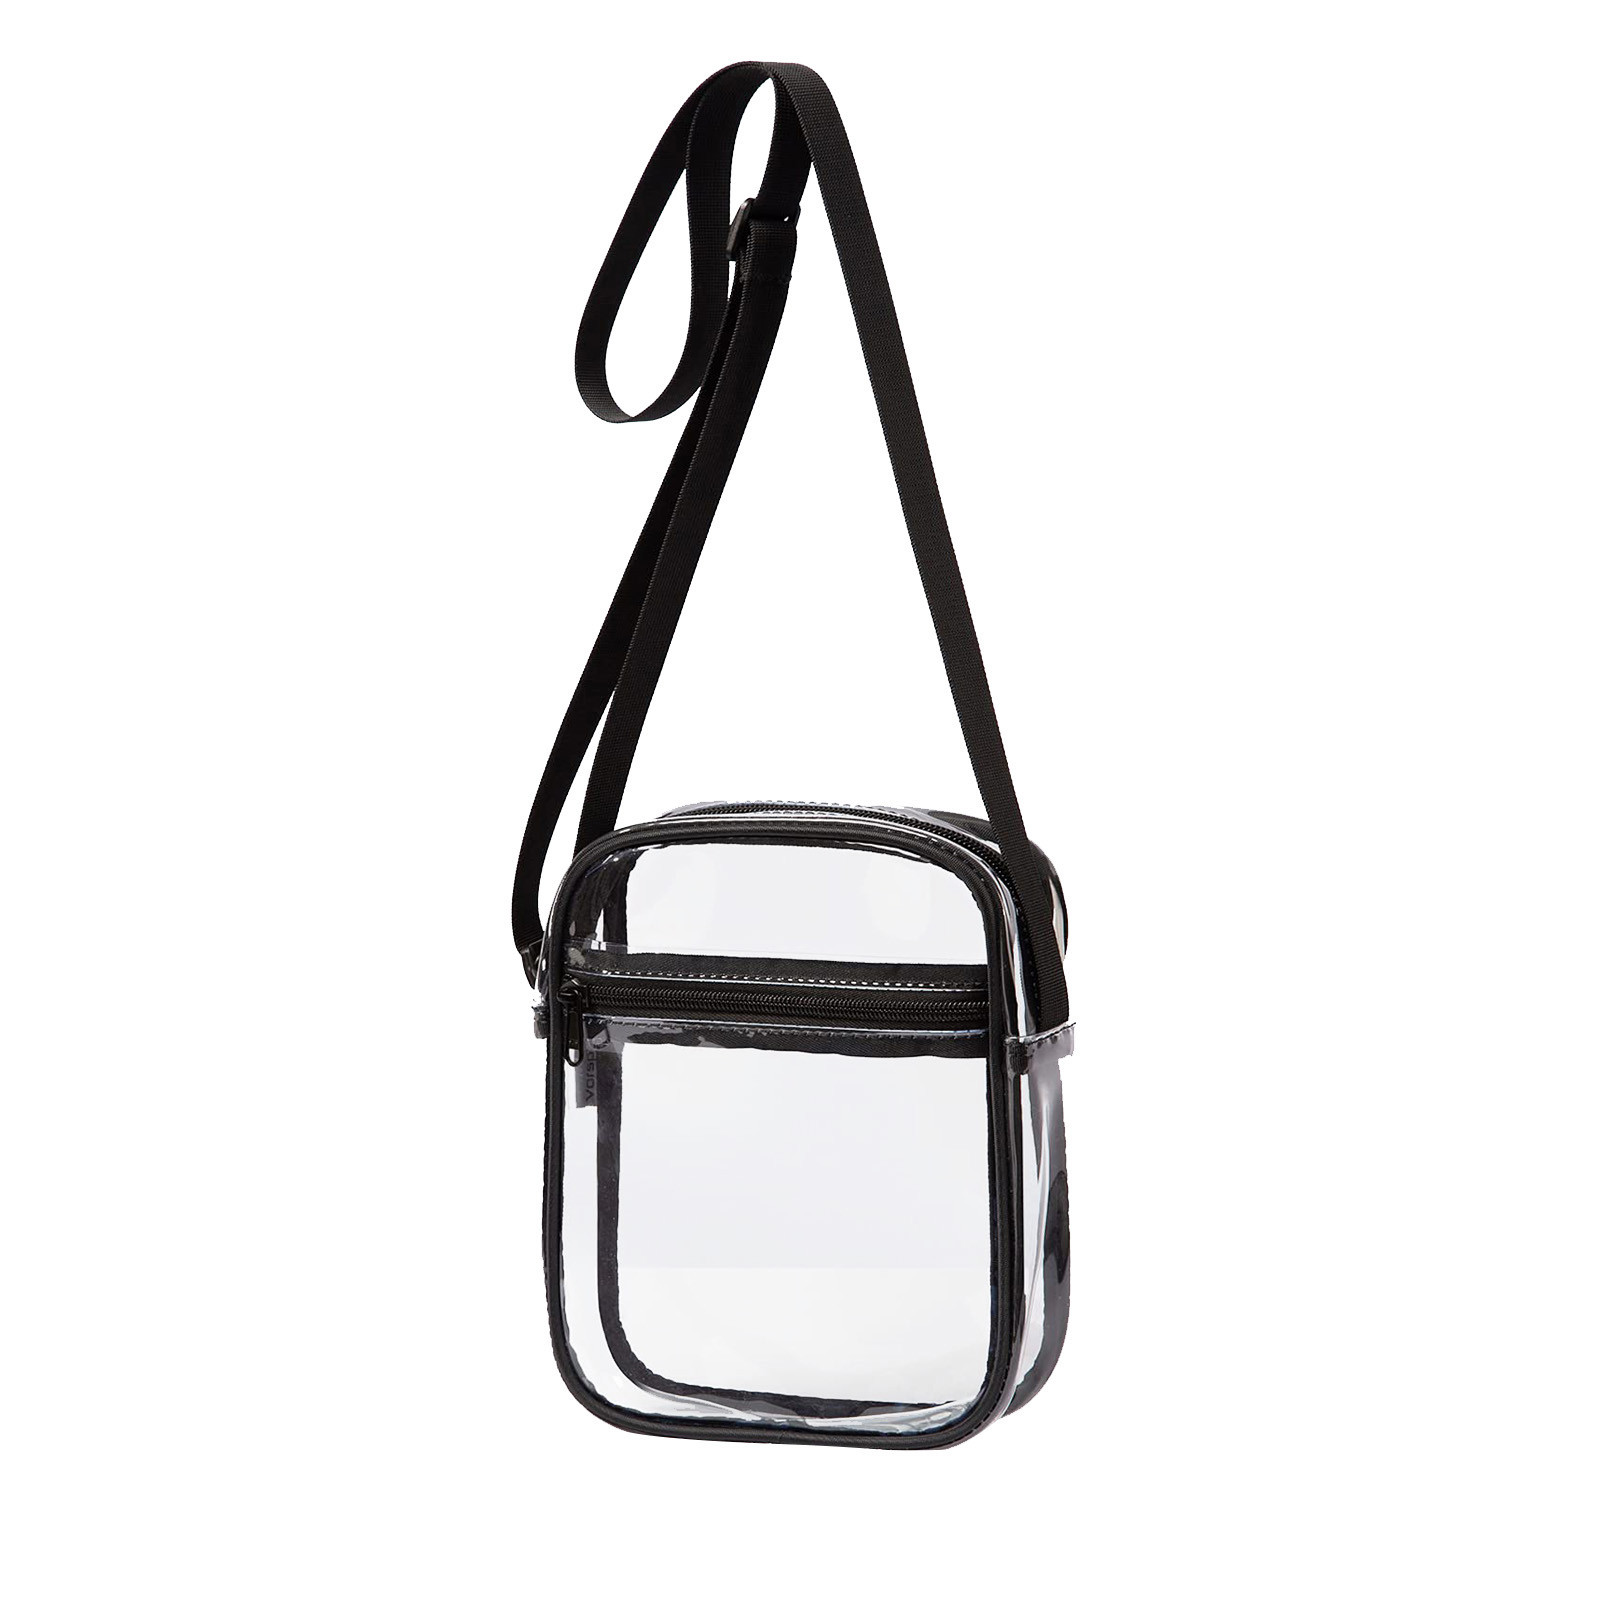 Foraging dimple Clear Bag Stadium Approved Purse Transparent Crossbody Bags for Women & Men PVC Messenger Handbag for Concert Sports Events - image 2 of 2